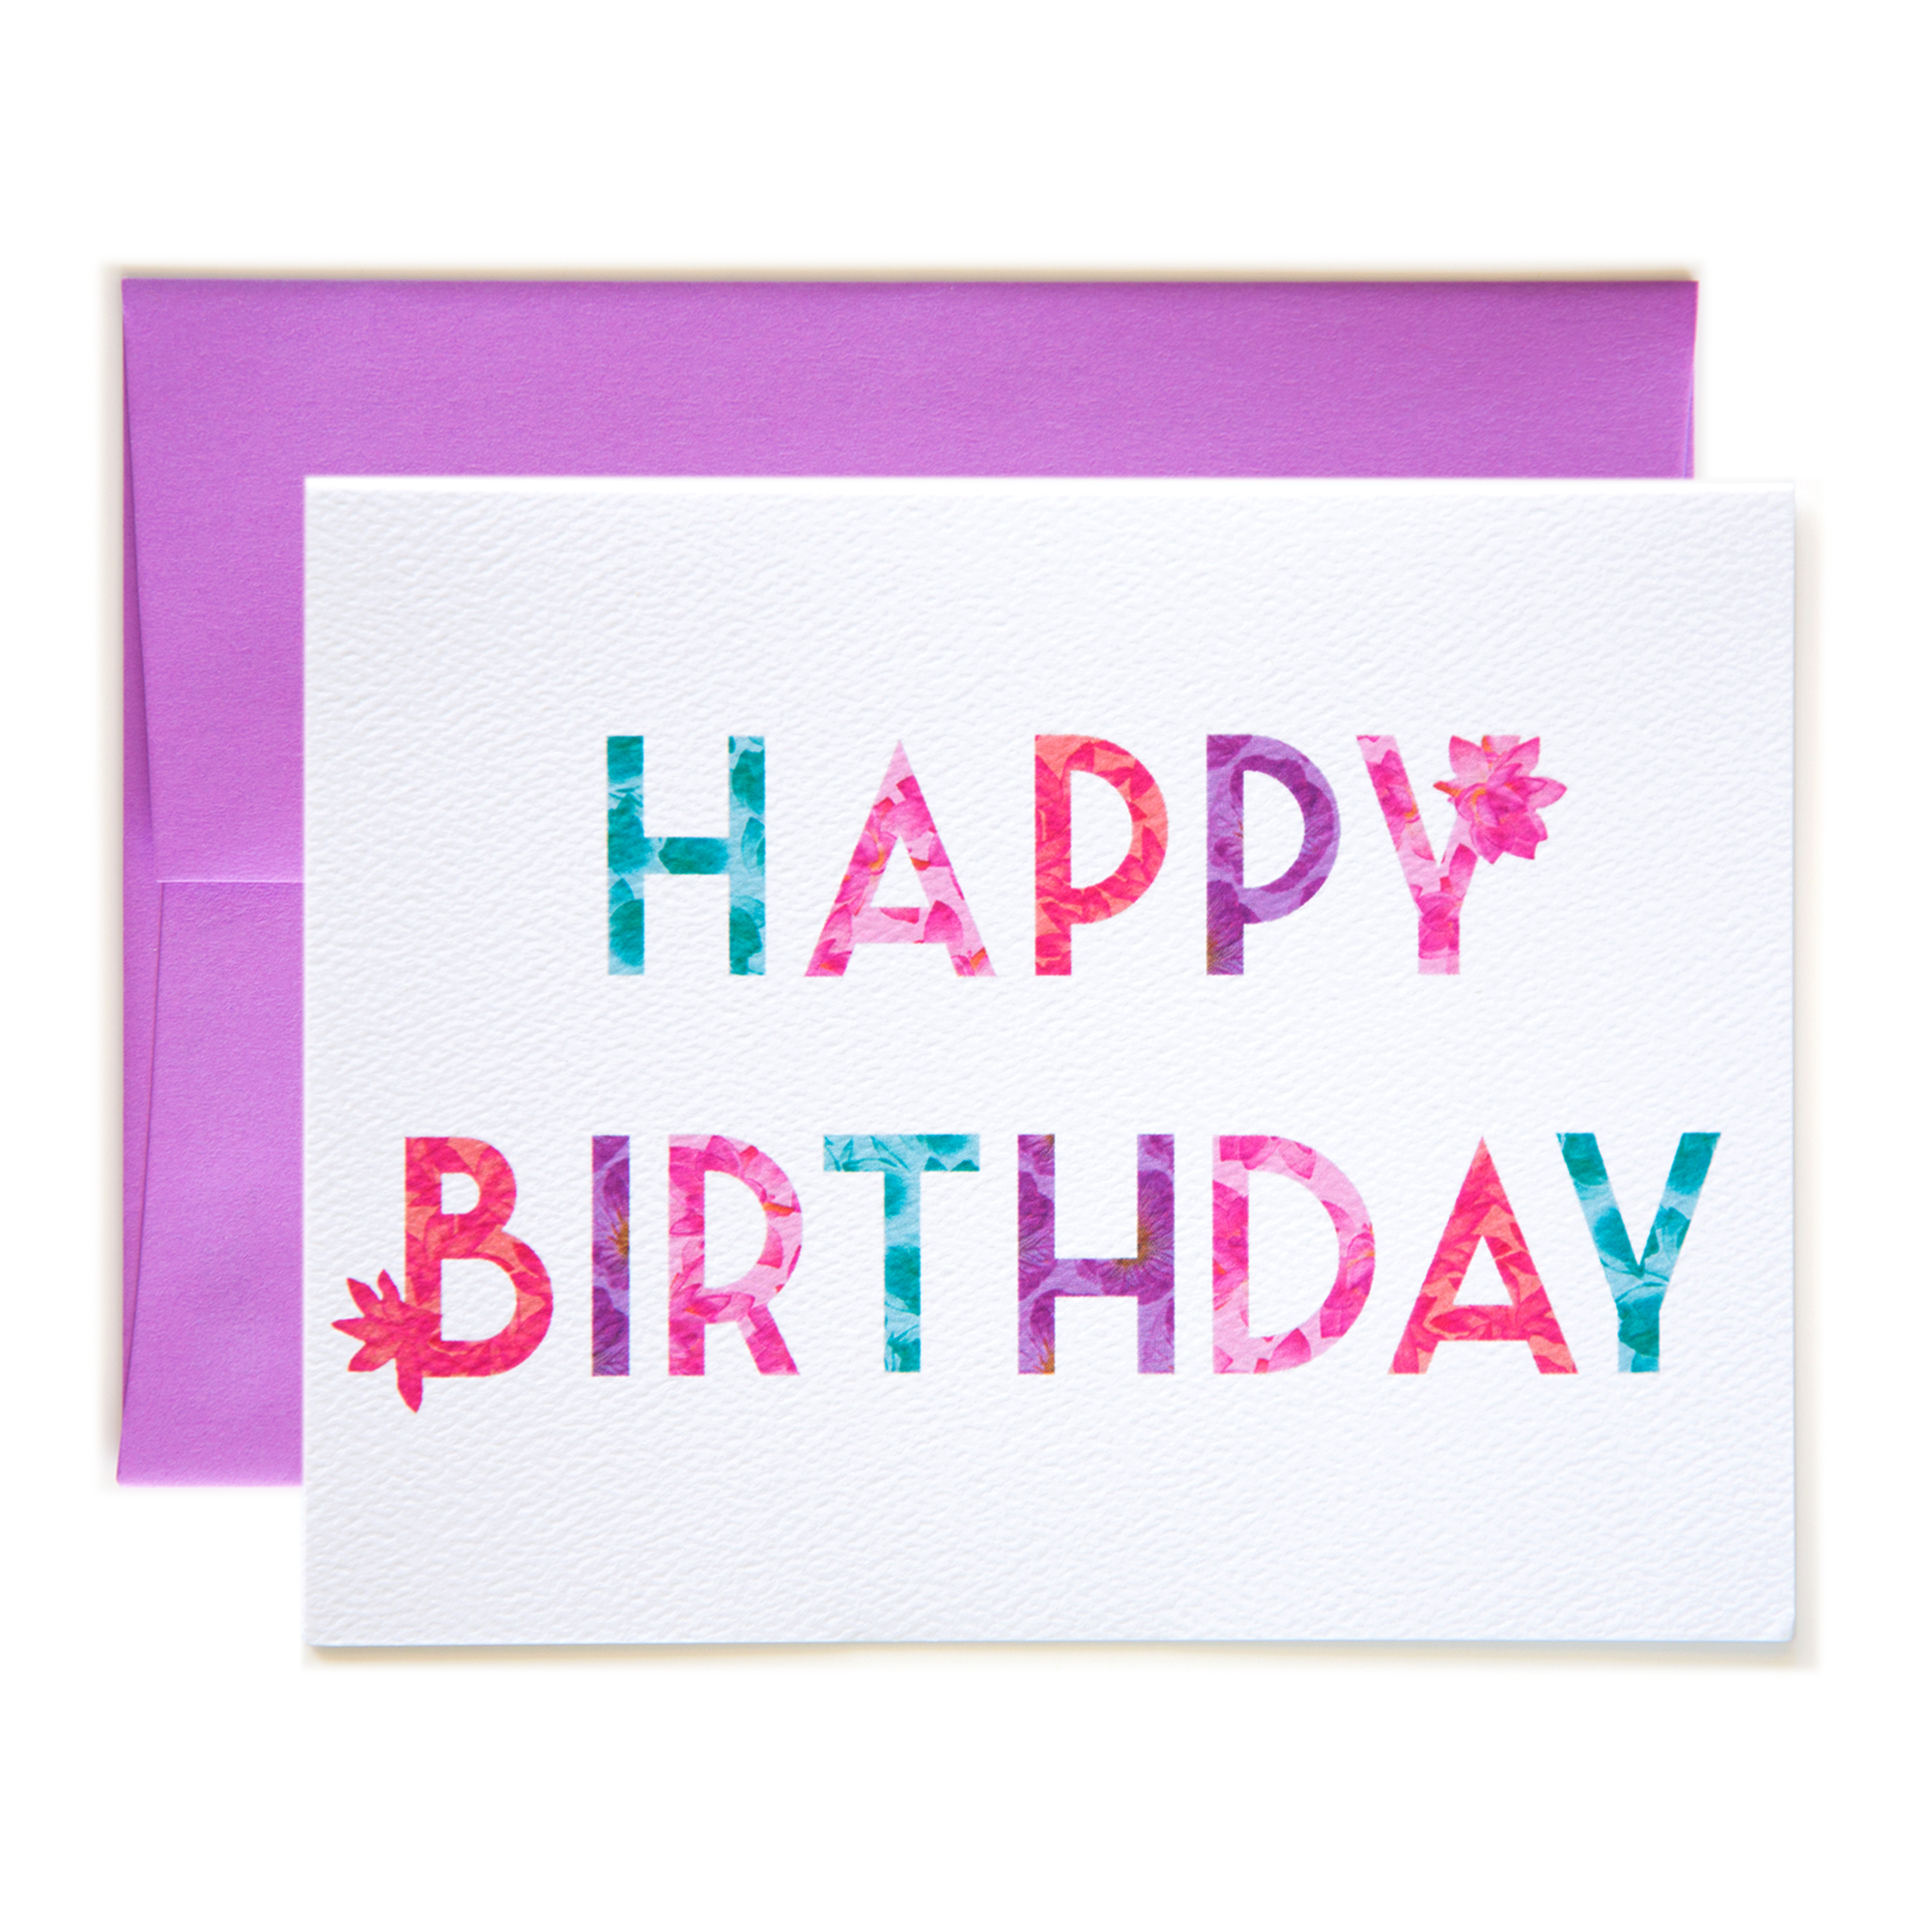 Floral Letters Happy Birthday Card